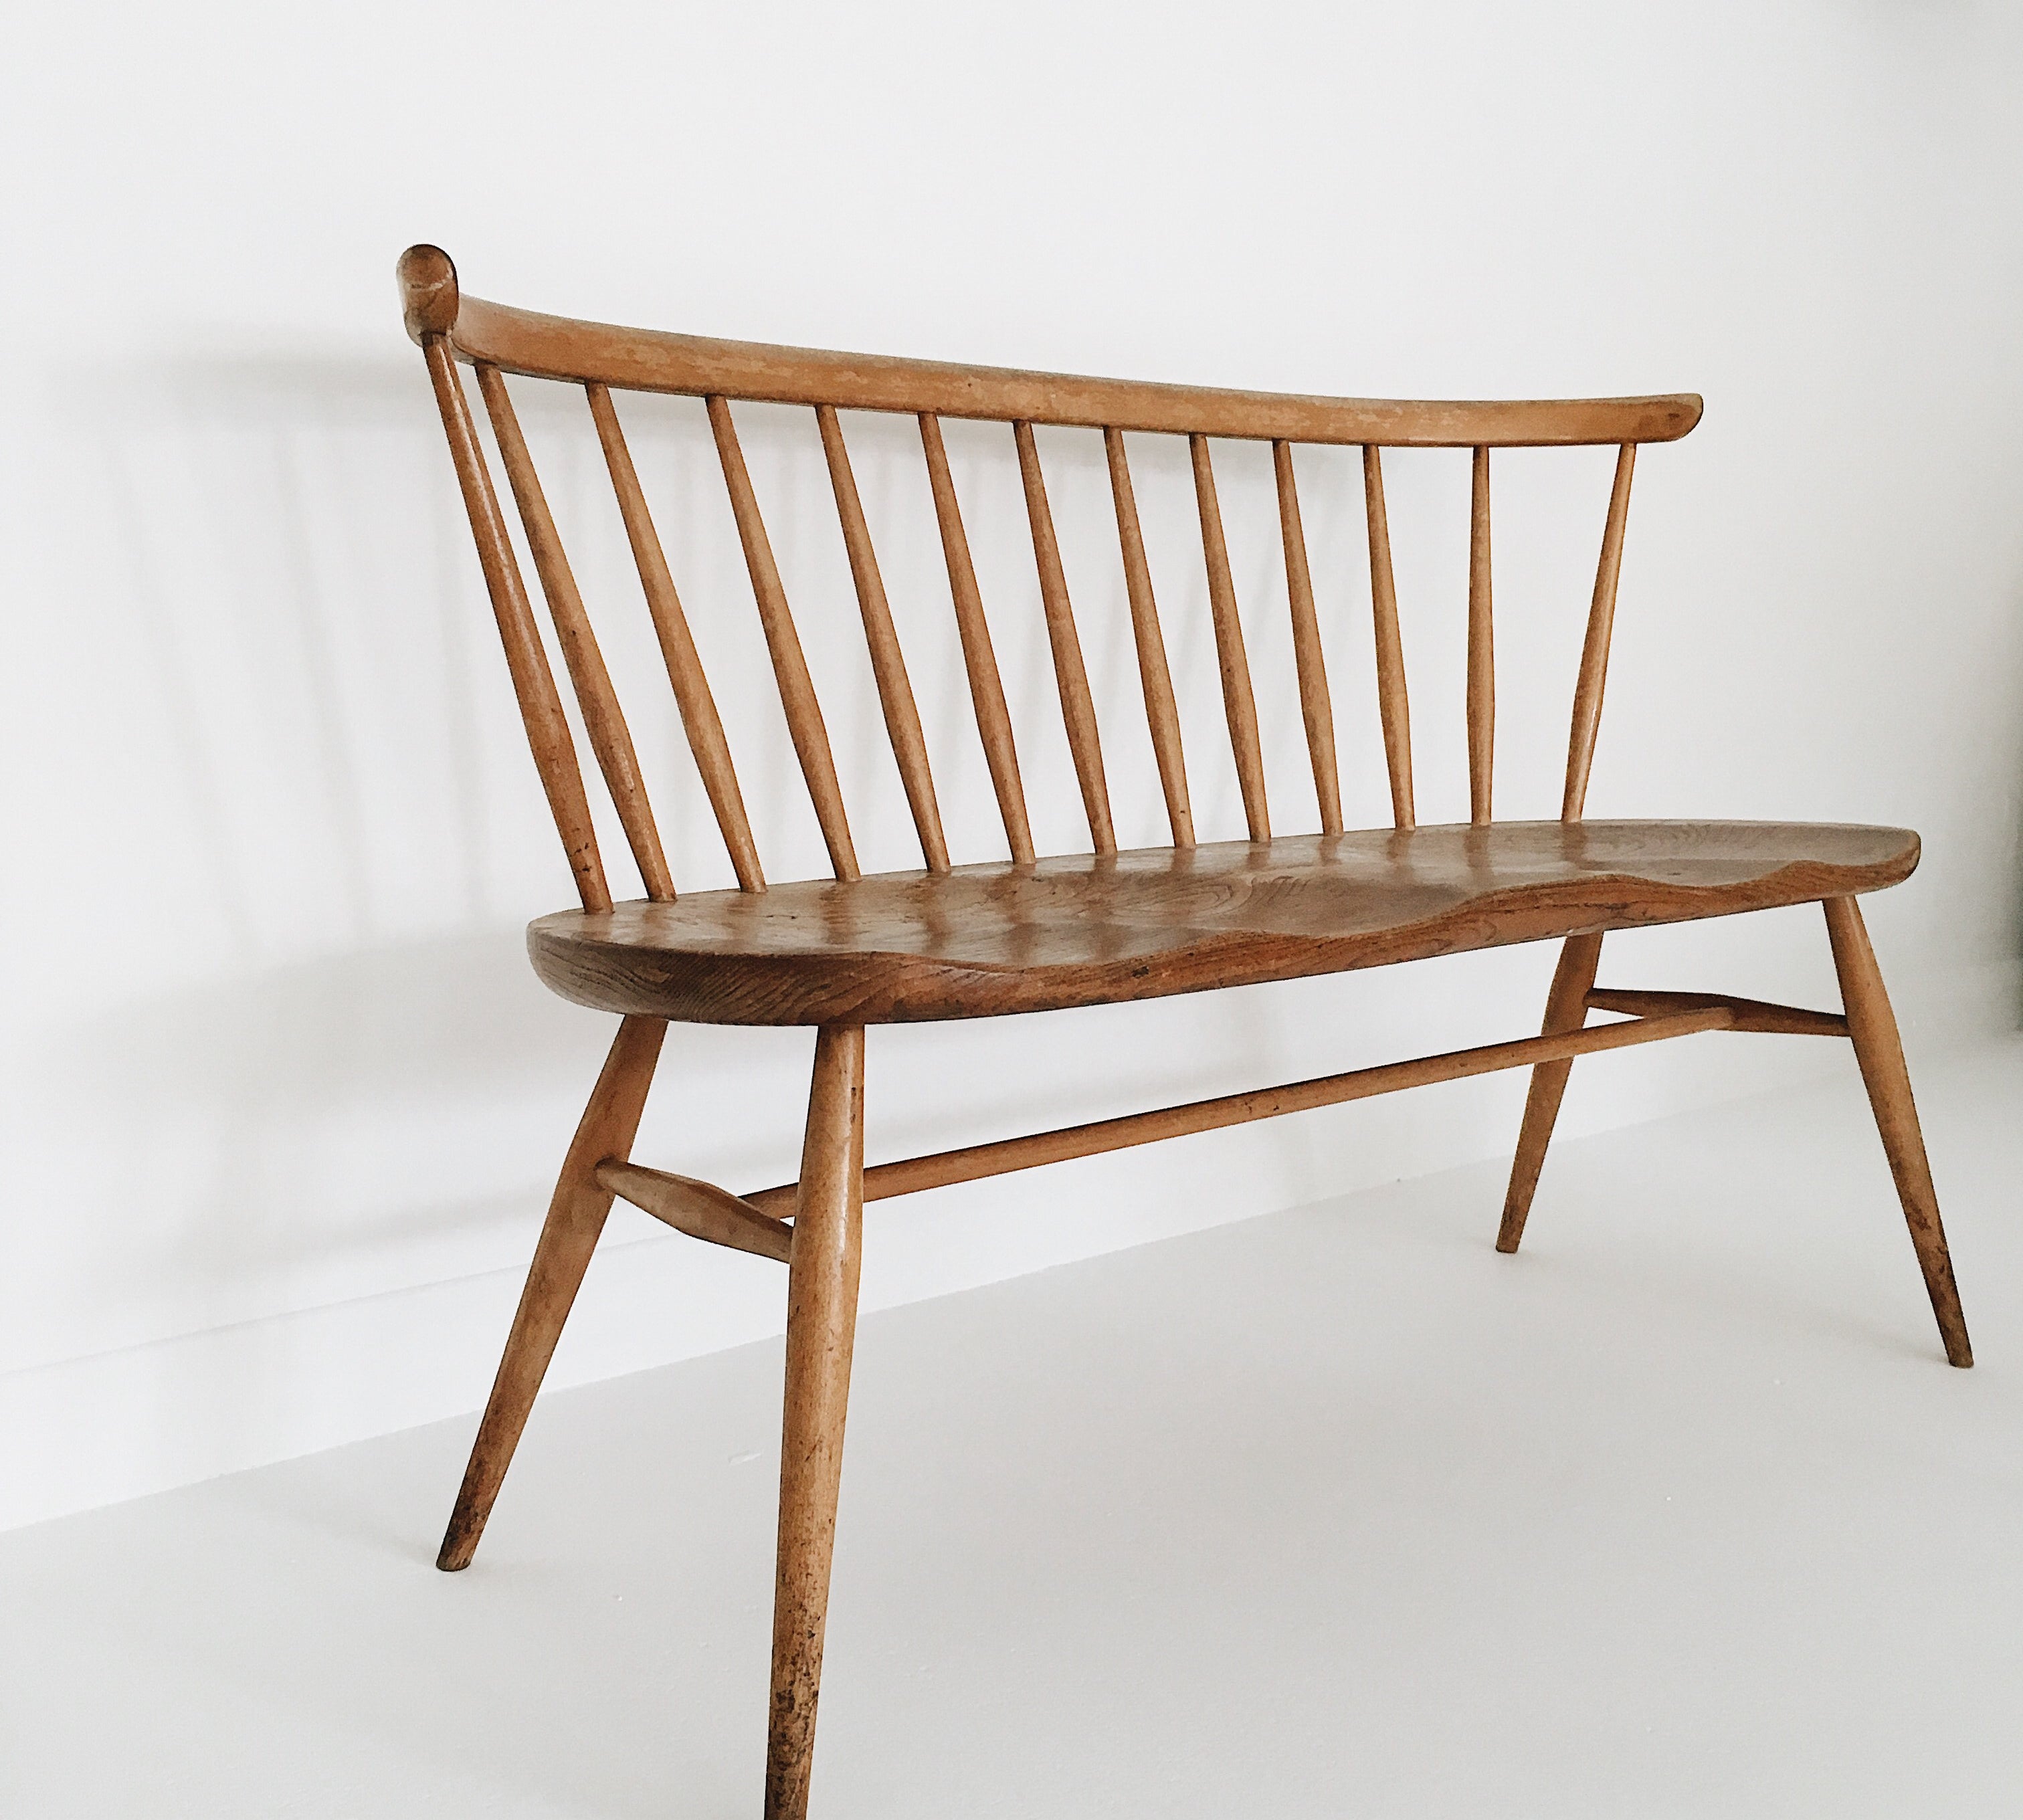 Vintage Ercol love seat - Tea and Kate